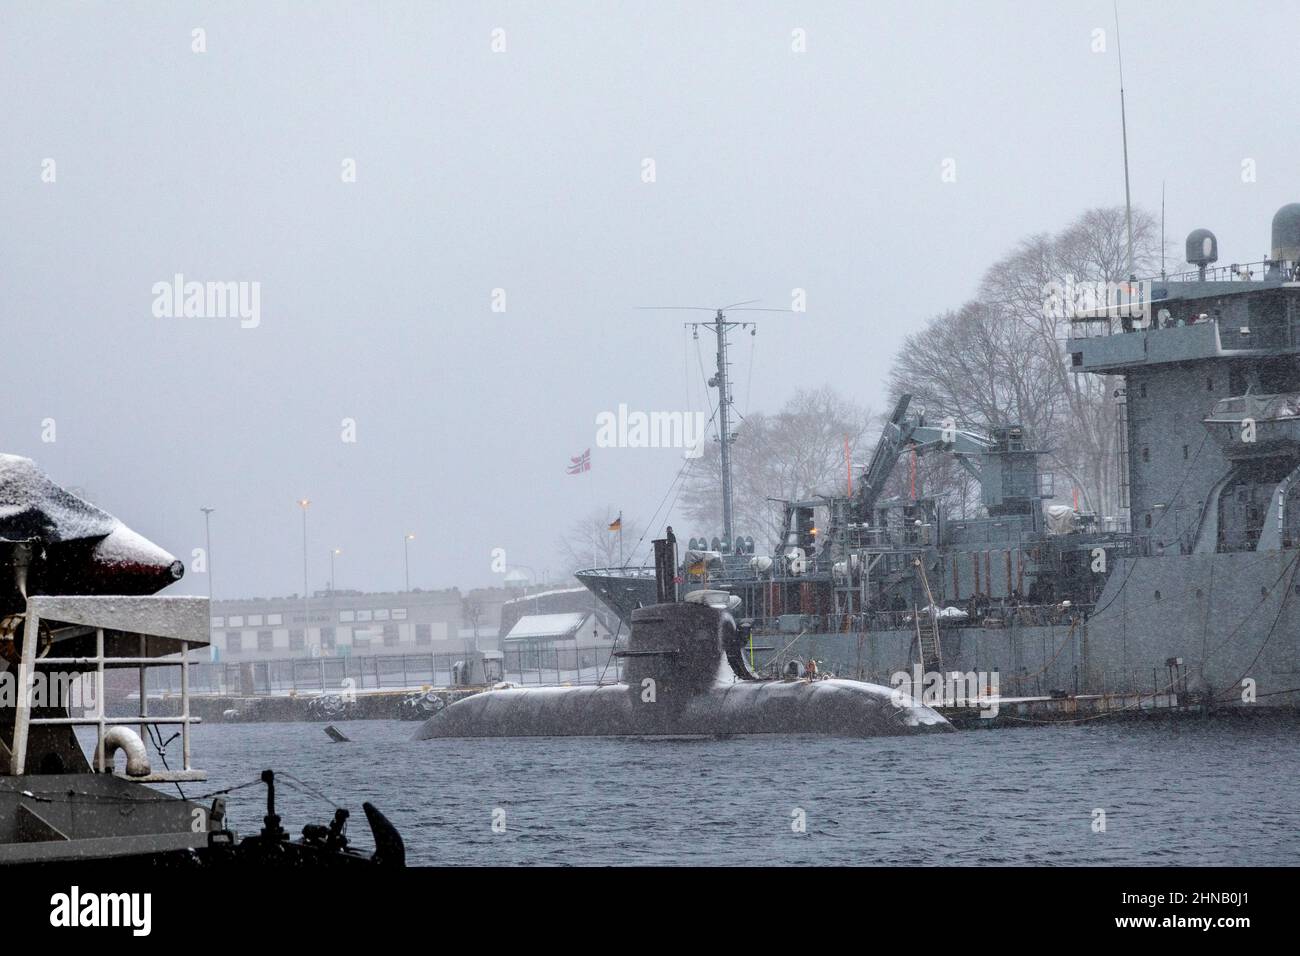 German navy replenishment and support vessel Main A515 in port of Bergen, Norway. Alongside is German submarine U32 (S182).  A foggy winter day Stock Photo